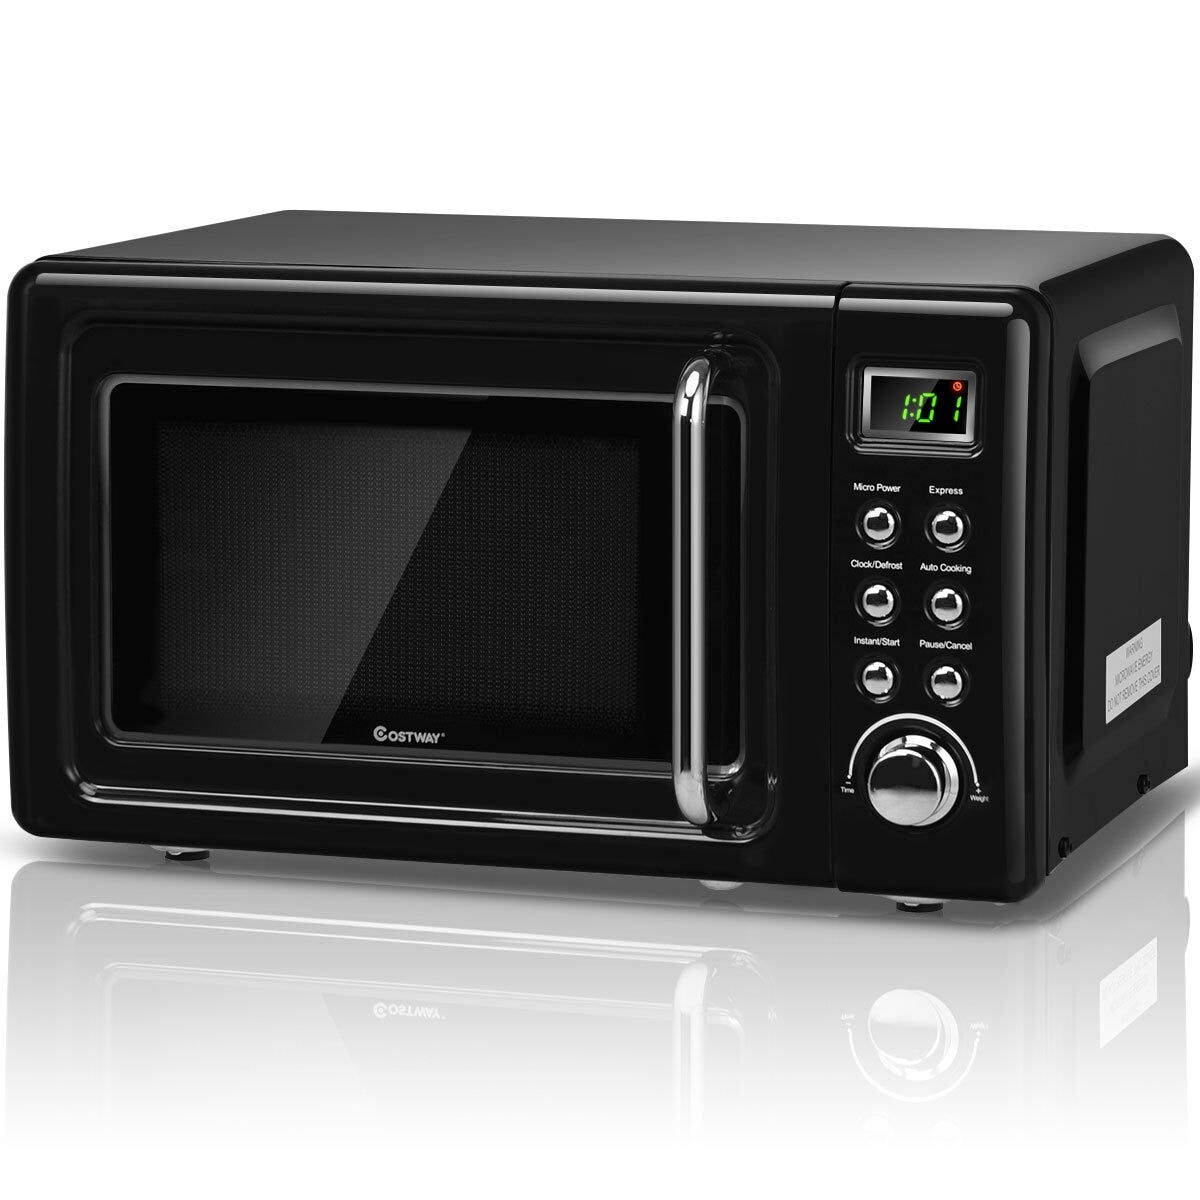 Retro Microwave Oven, SIMOE Compact Countertop Microwave 0.9 cu.ft. 900 W,  Defrost & Auto Cooking Function, LED Display, Child Lock and Glass